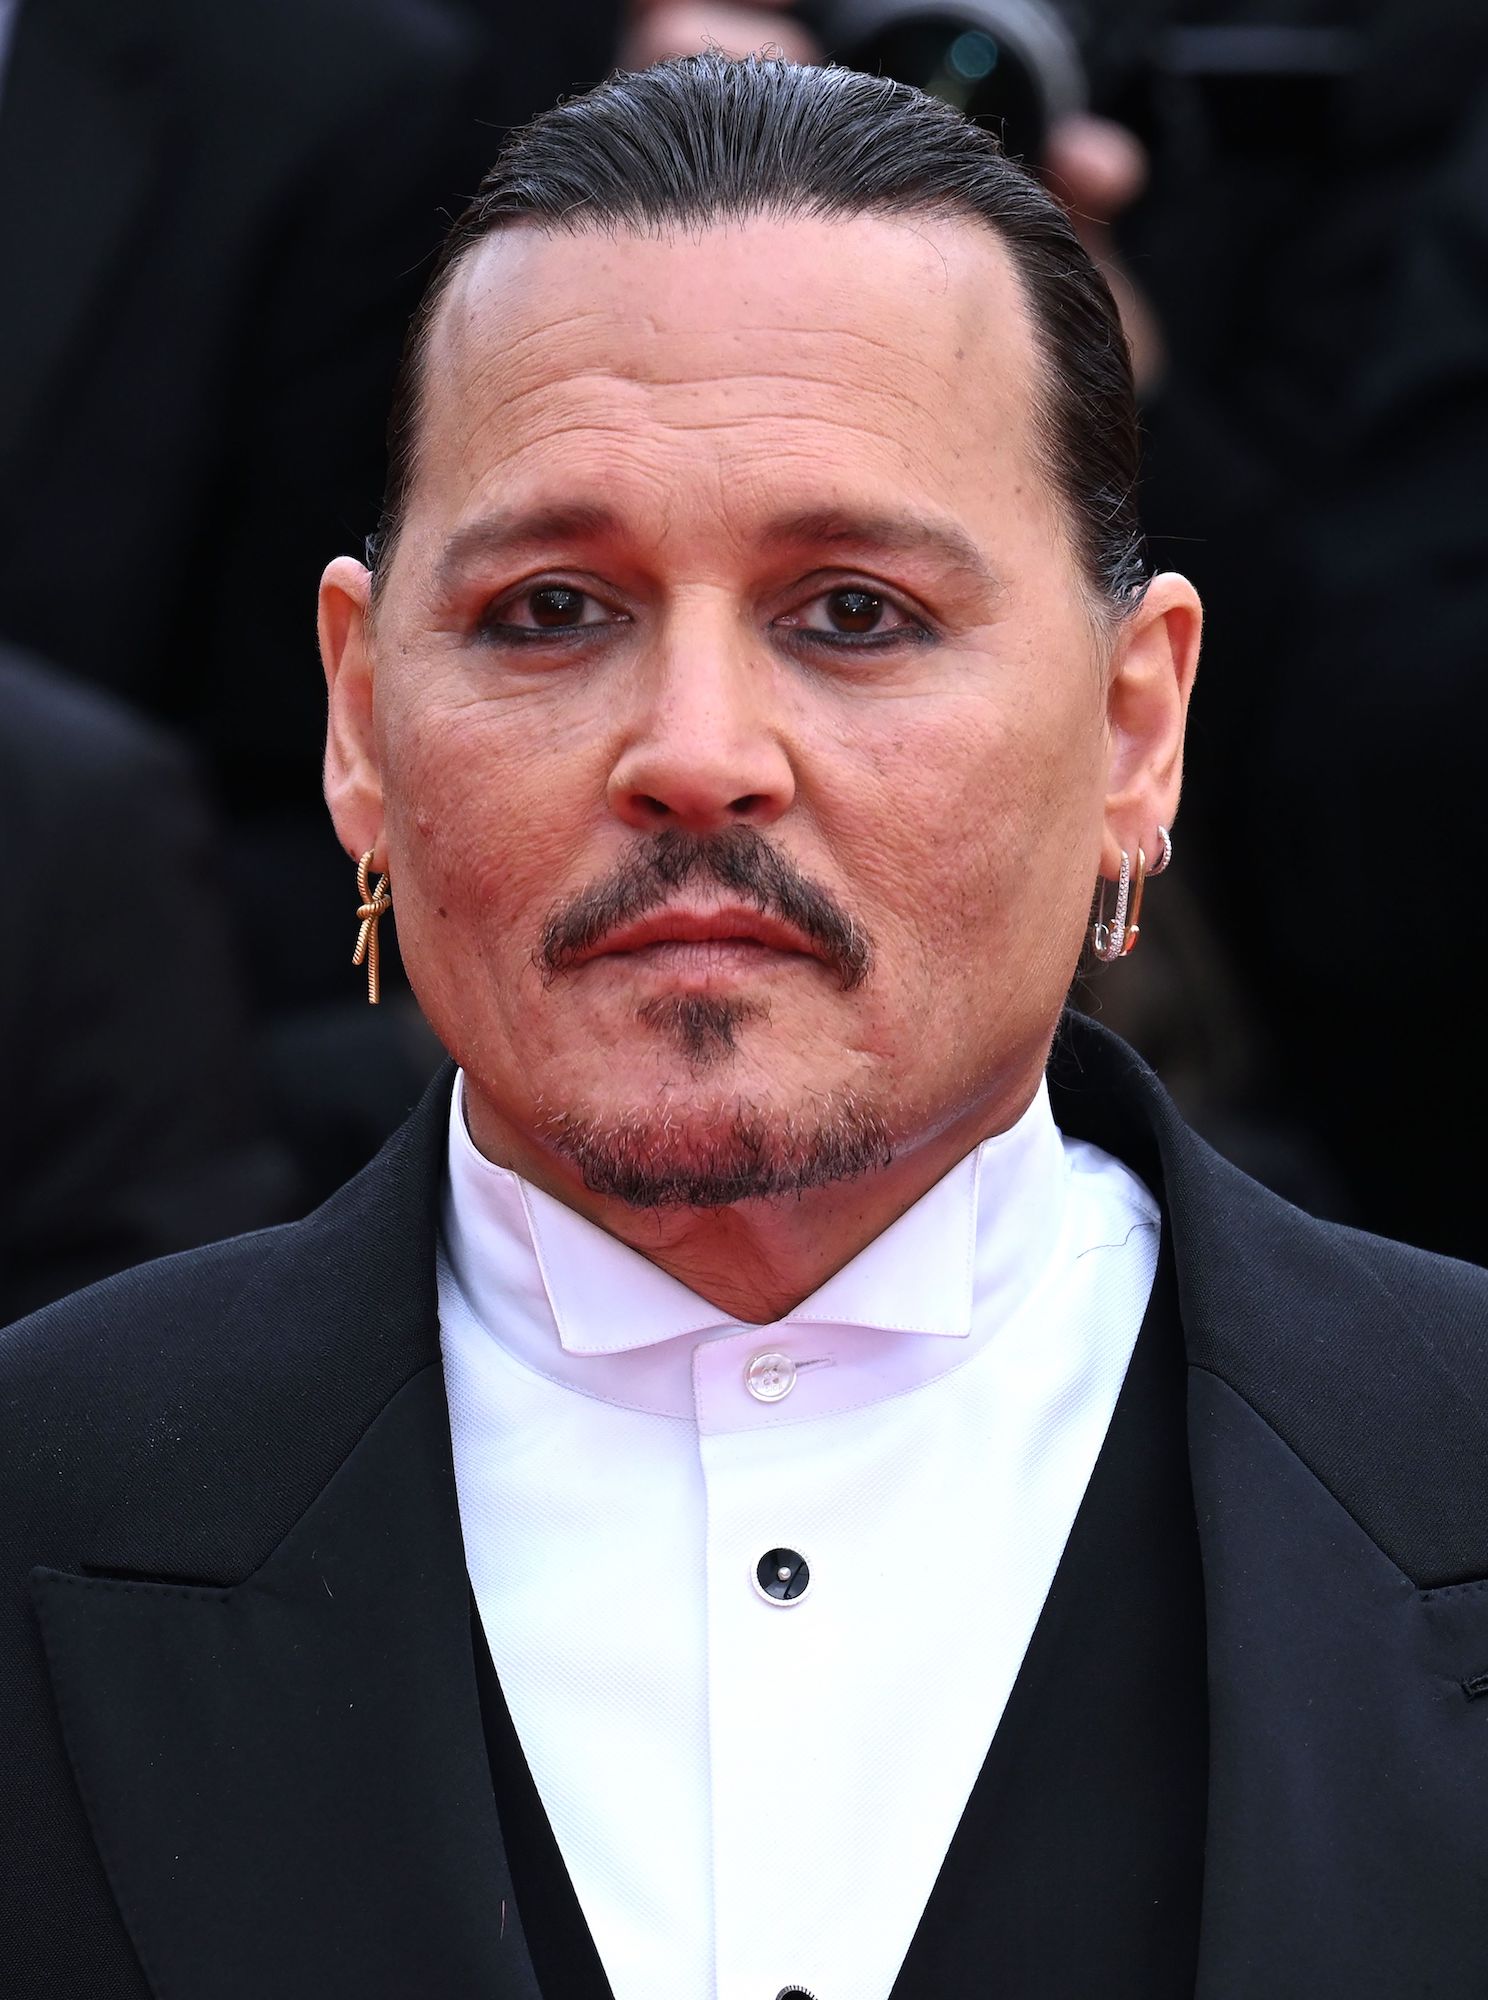 Johnny Depp Gets Emotional Amid 7-Minute Ovation at Cannes After Legal ...